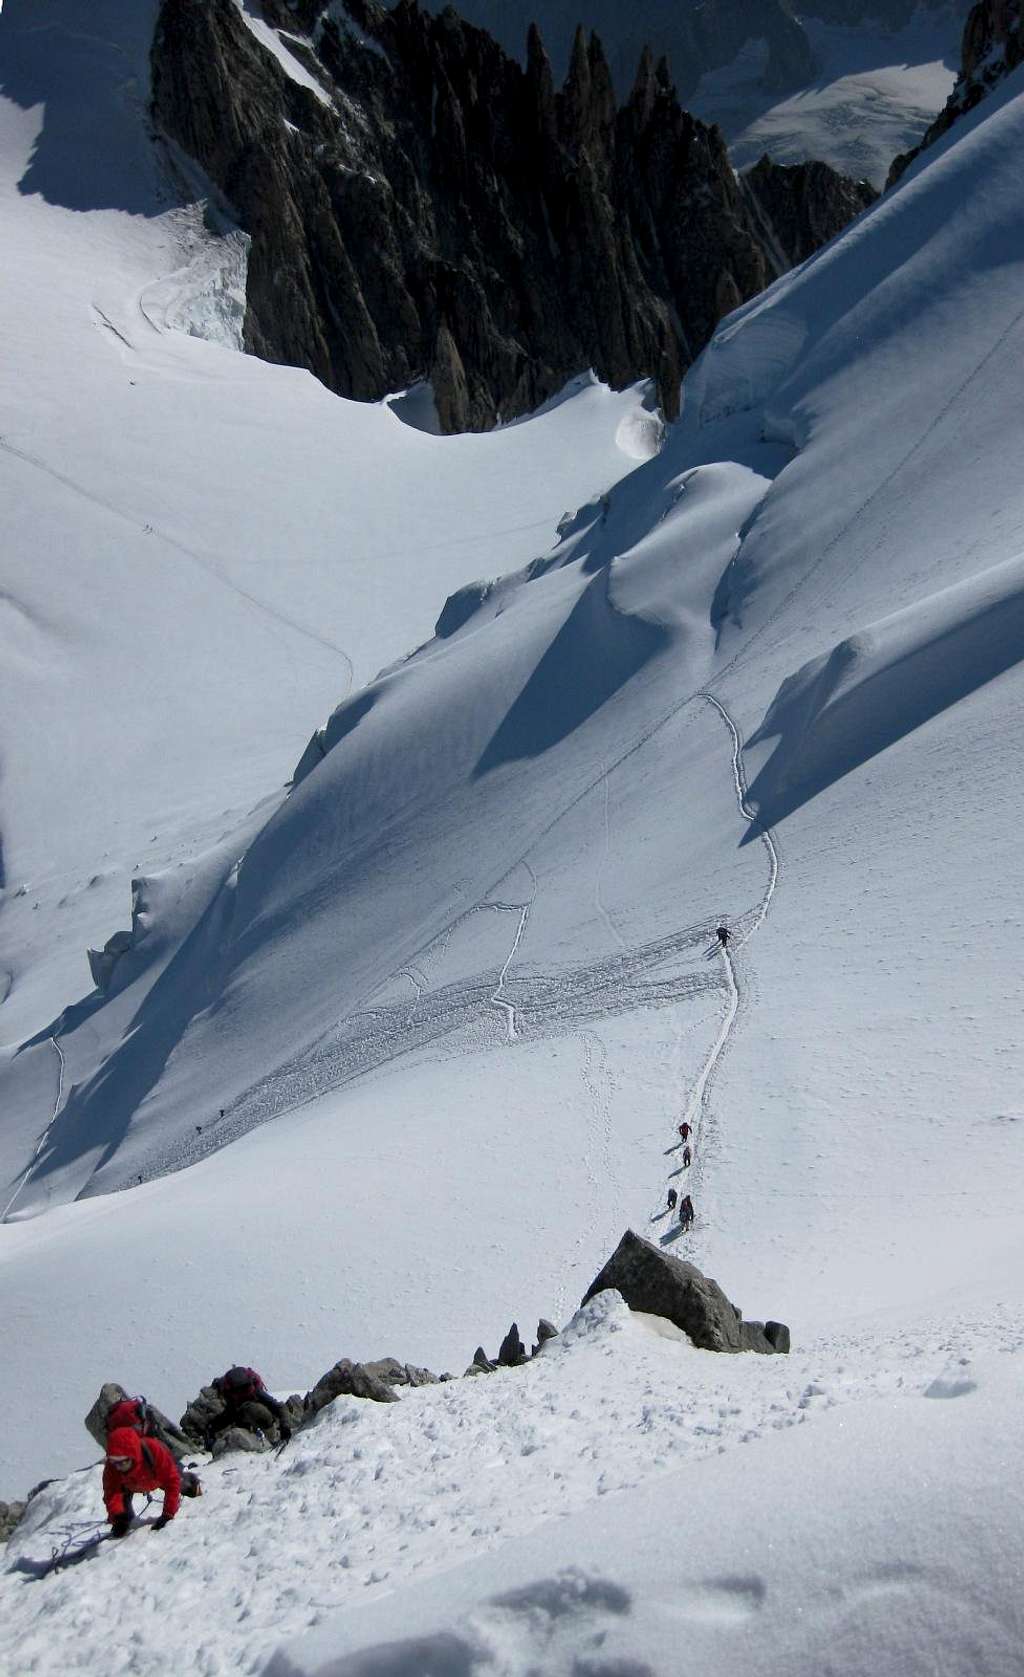 A steep section on northern slopes of Mont Blanc